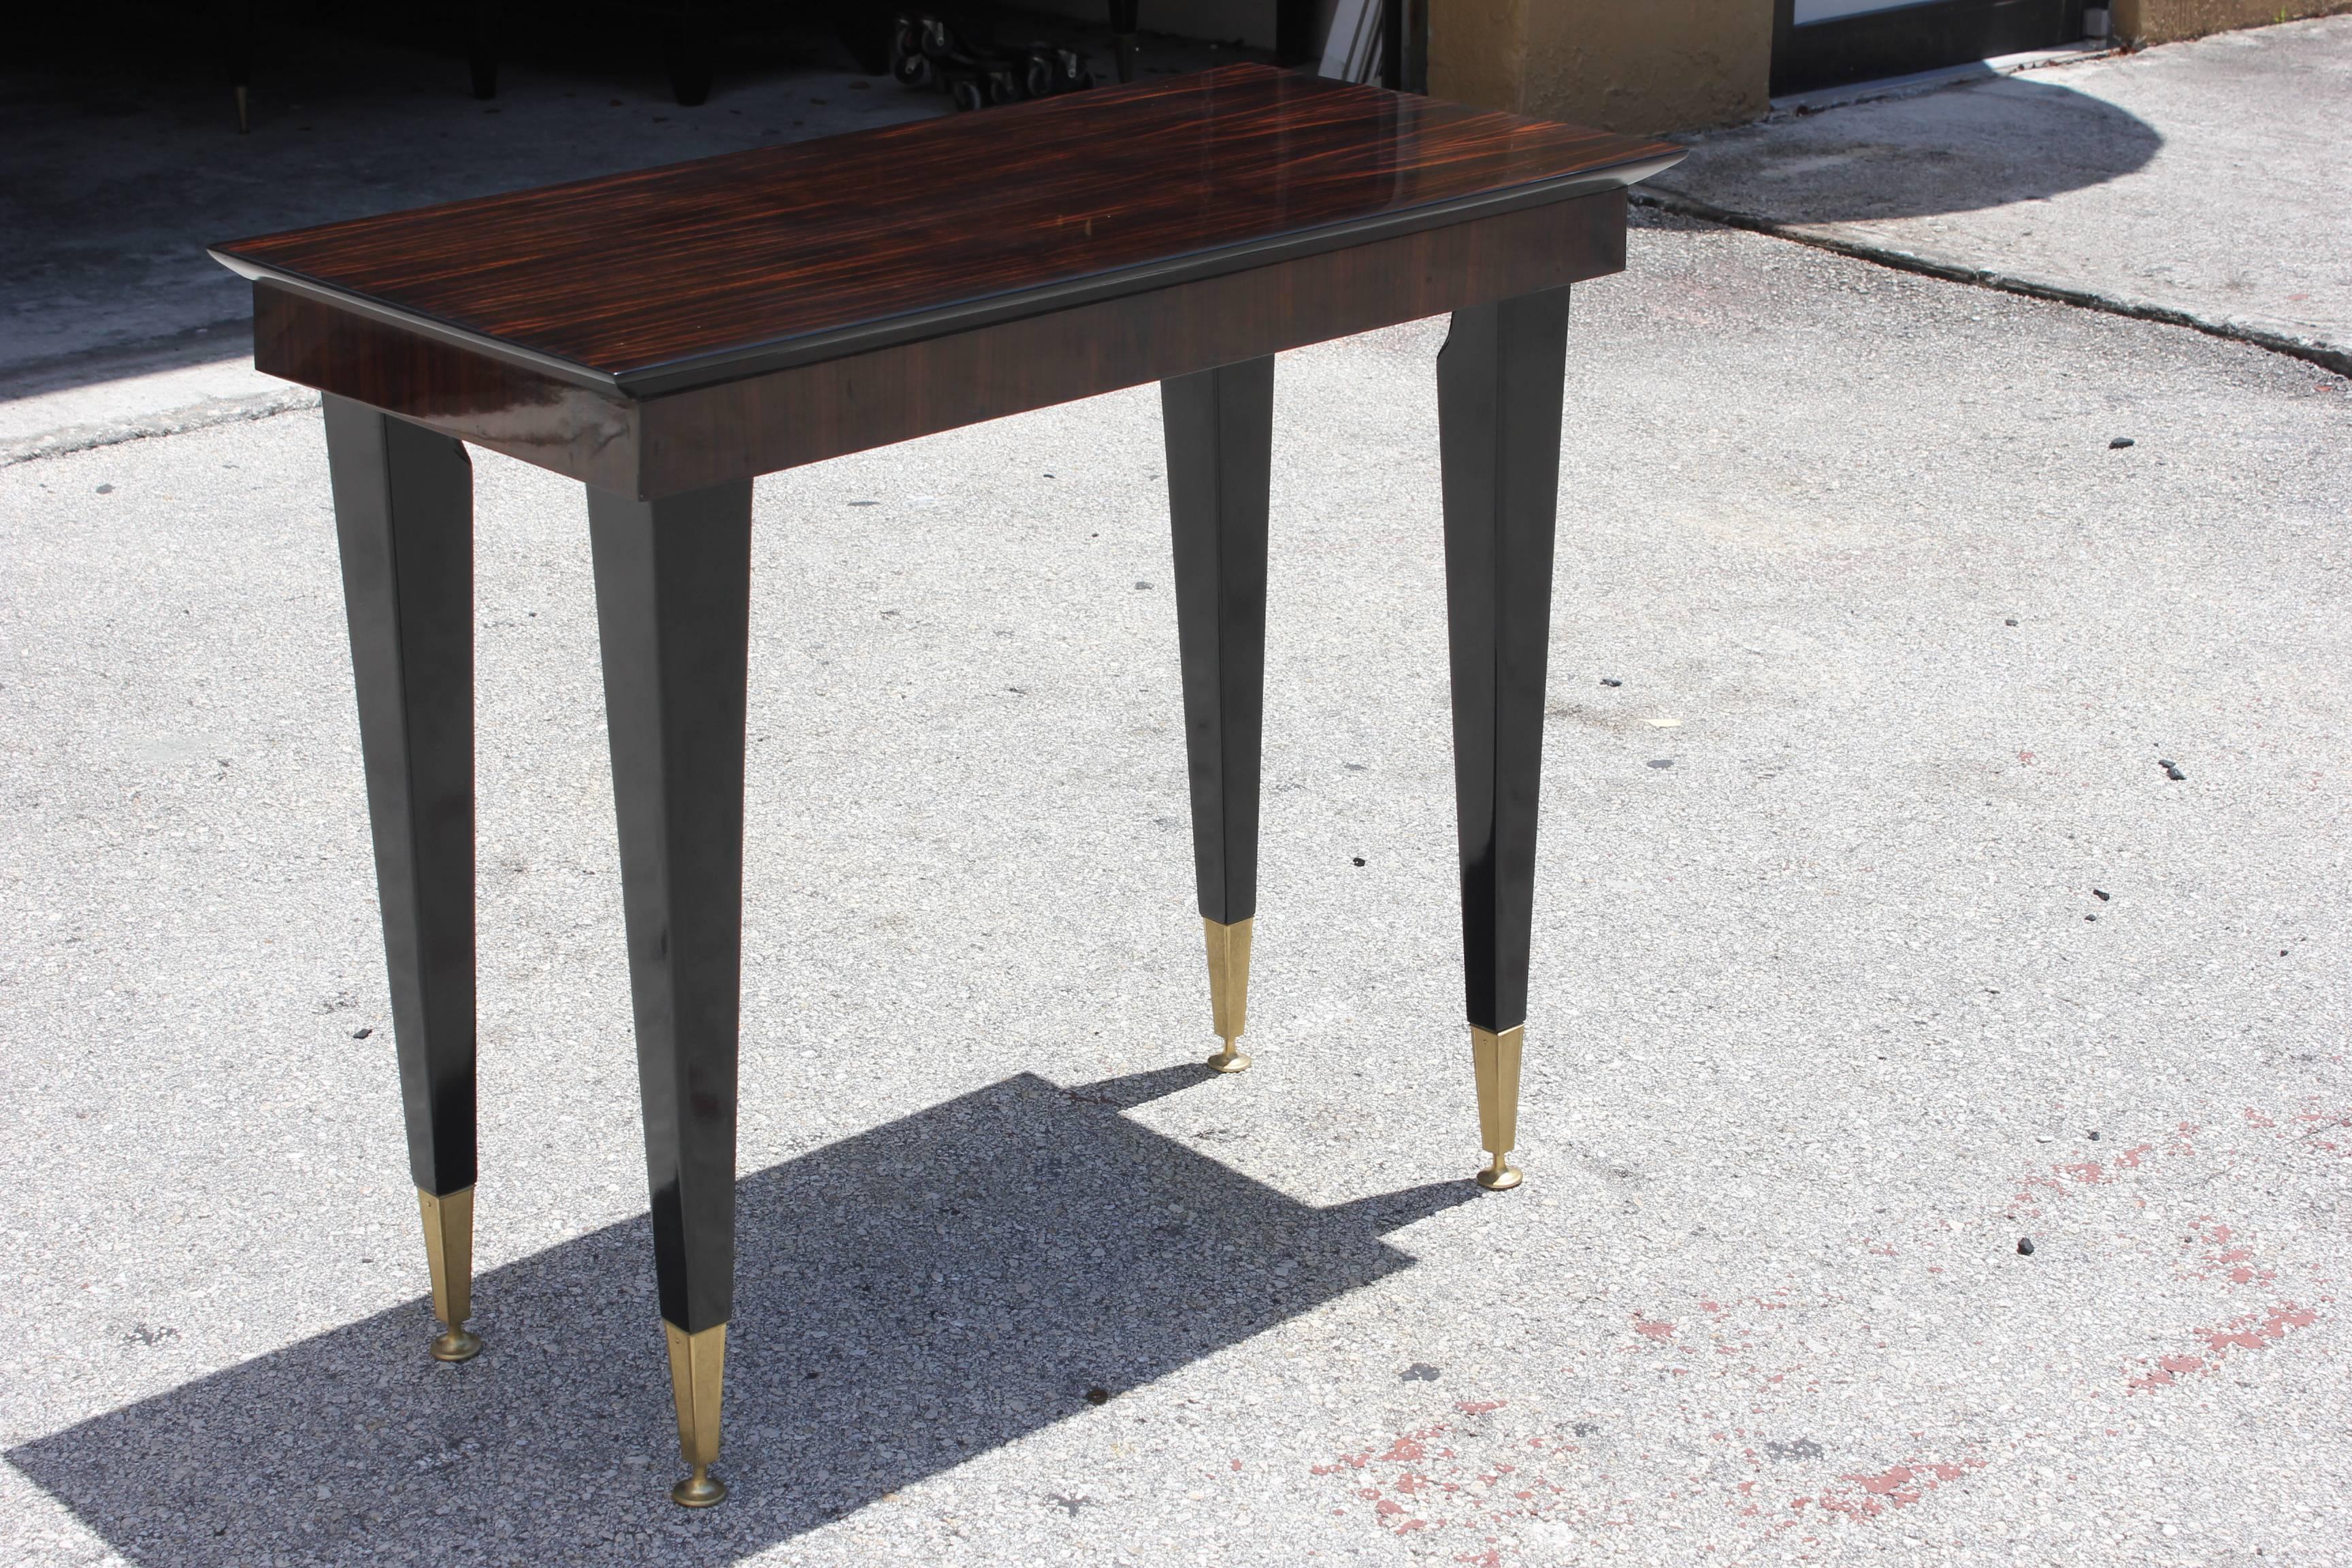 A French Art Deco exotic Macassar ebony console table, circa 1940s. Black lacquer legs and toe caps. Stunning piece!